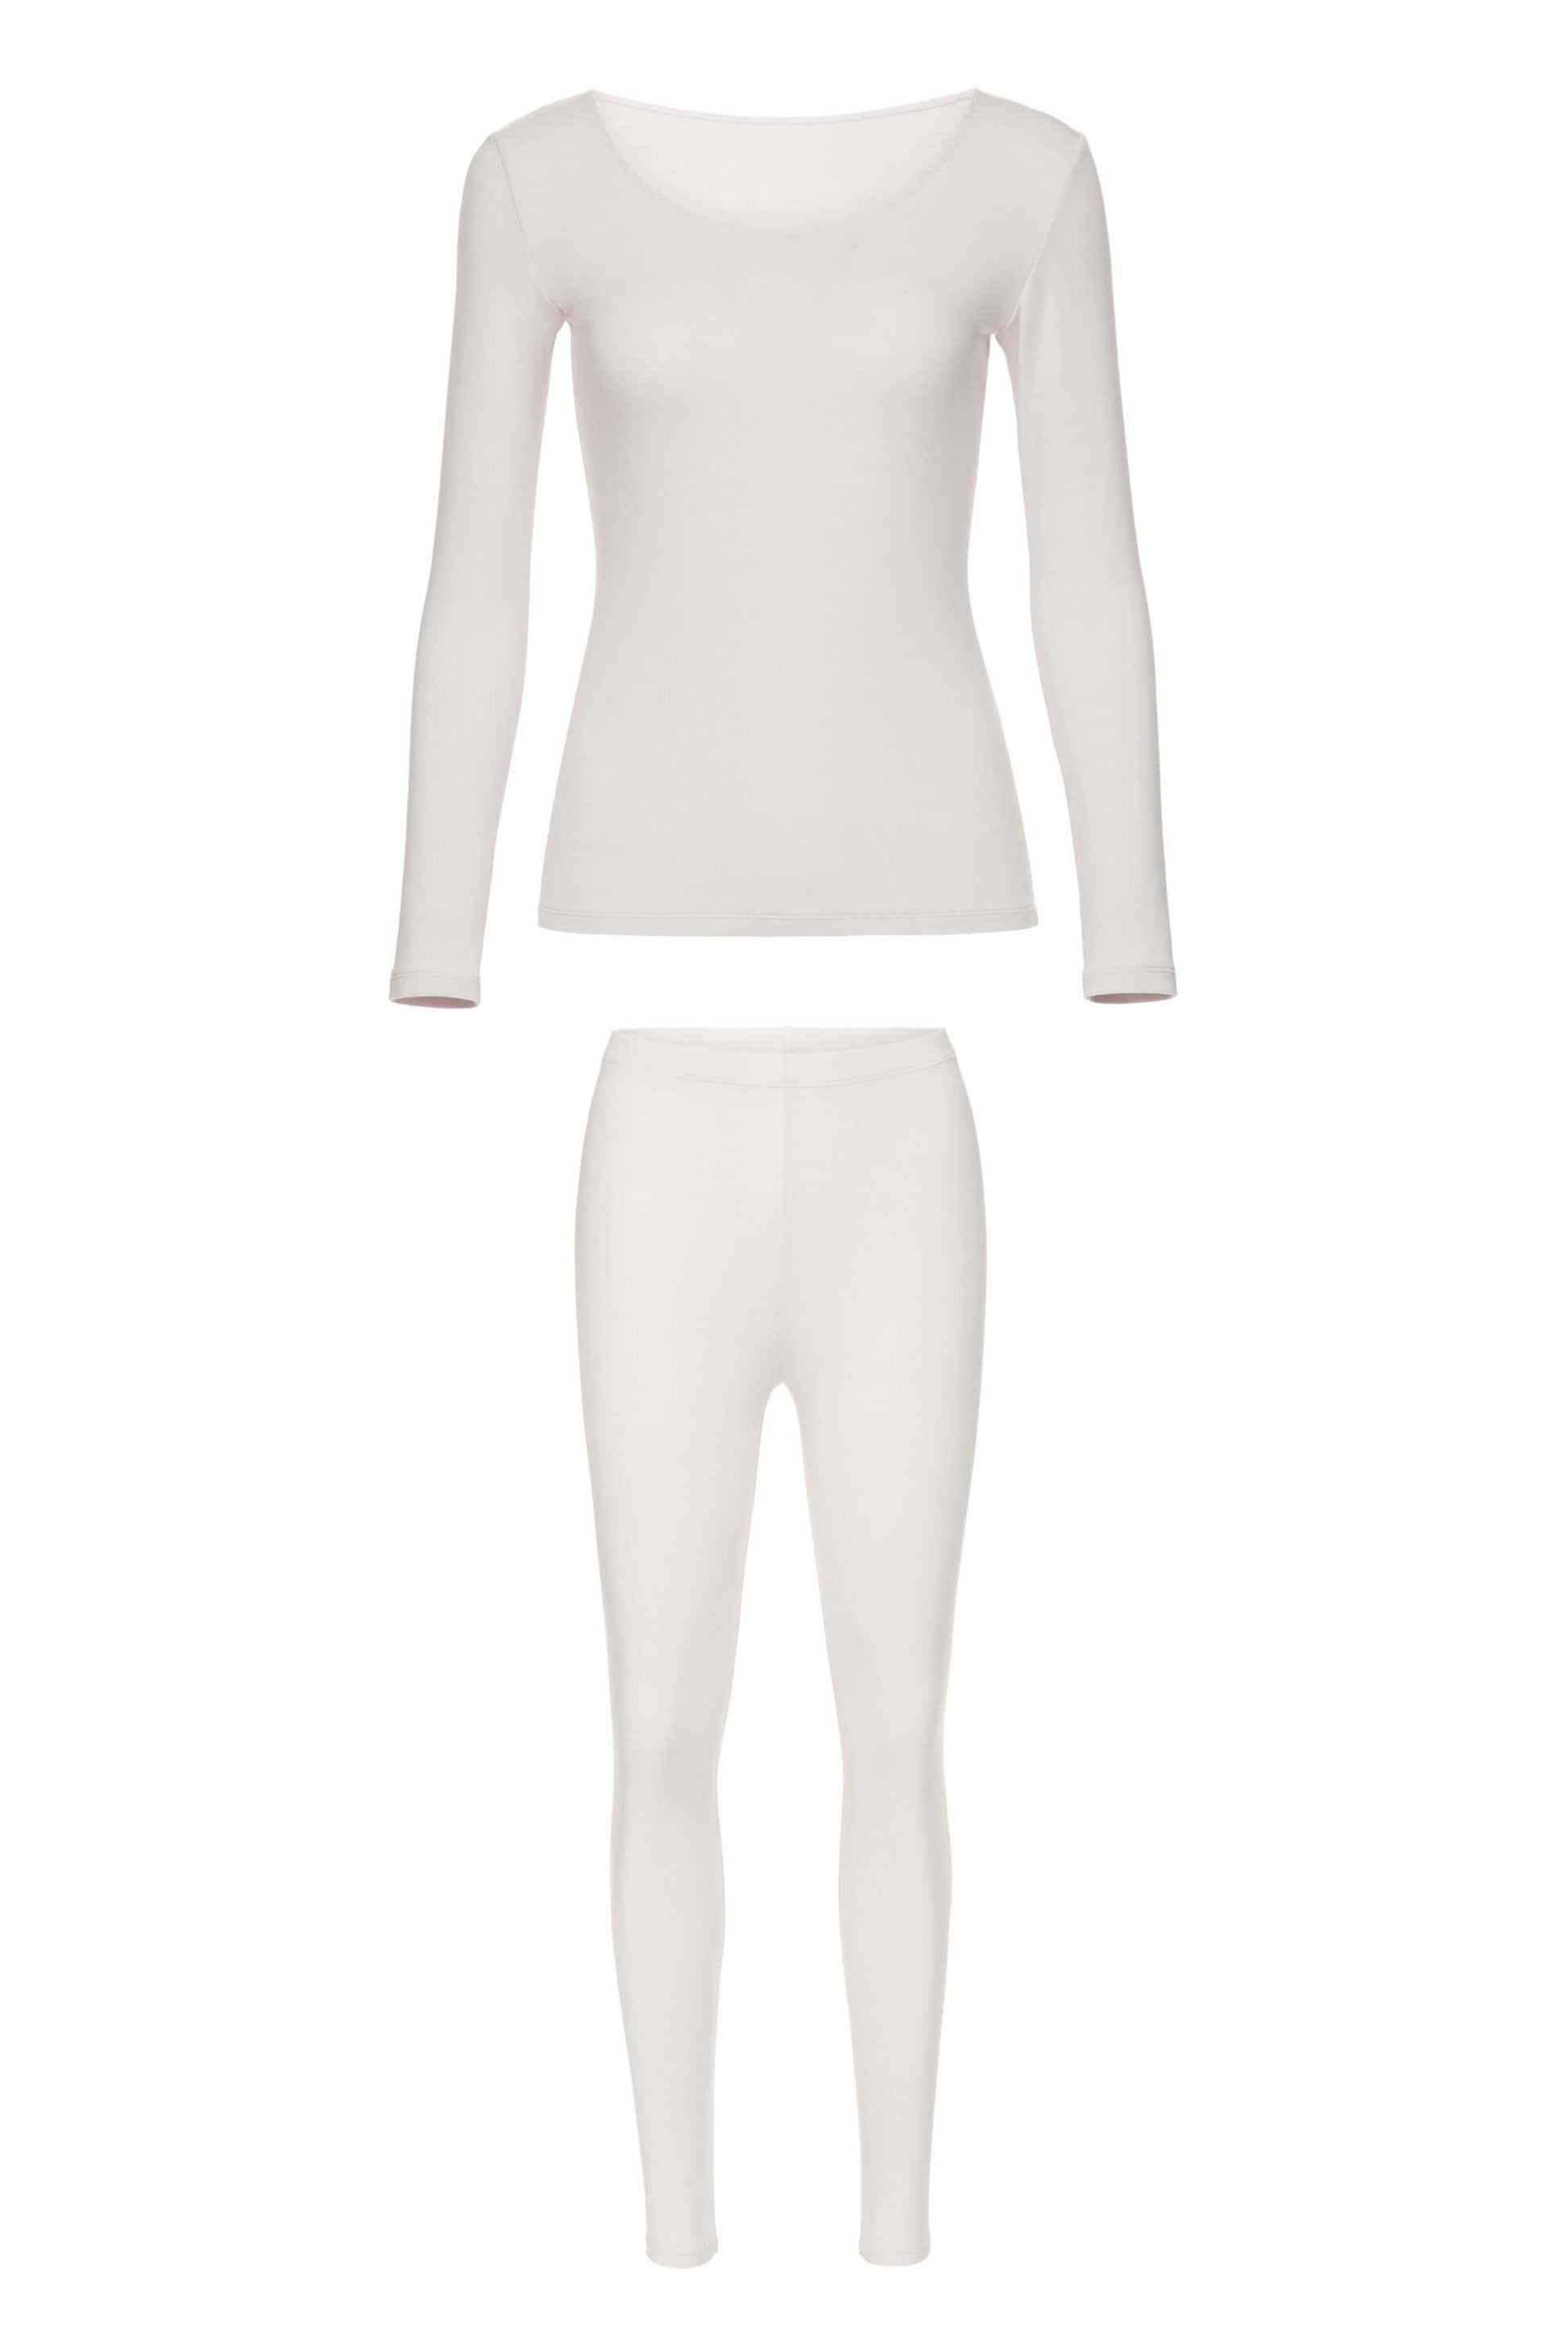 image of off white thermal top and pants